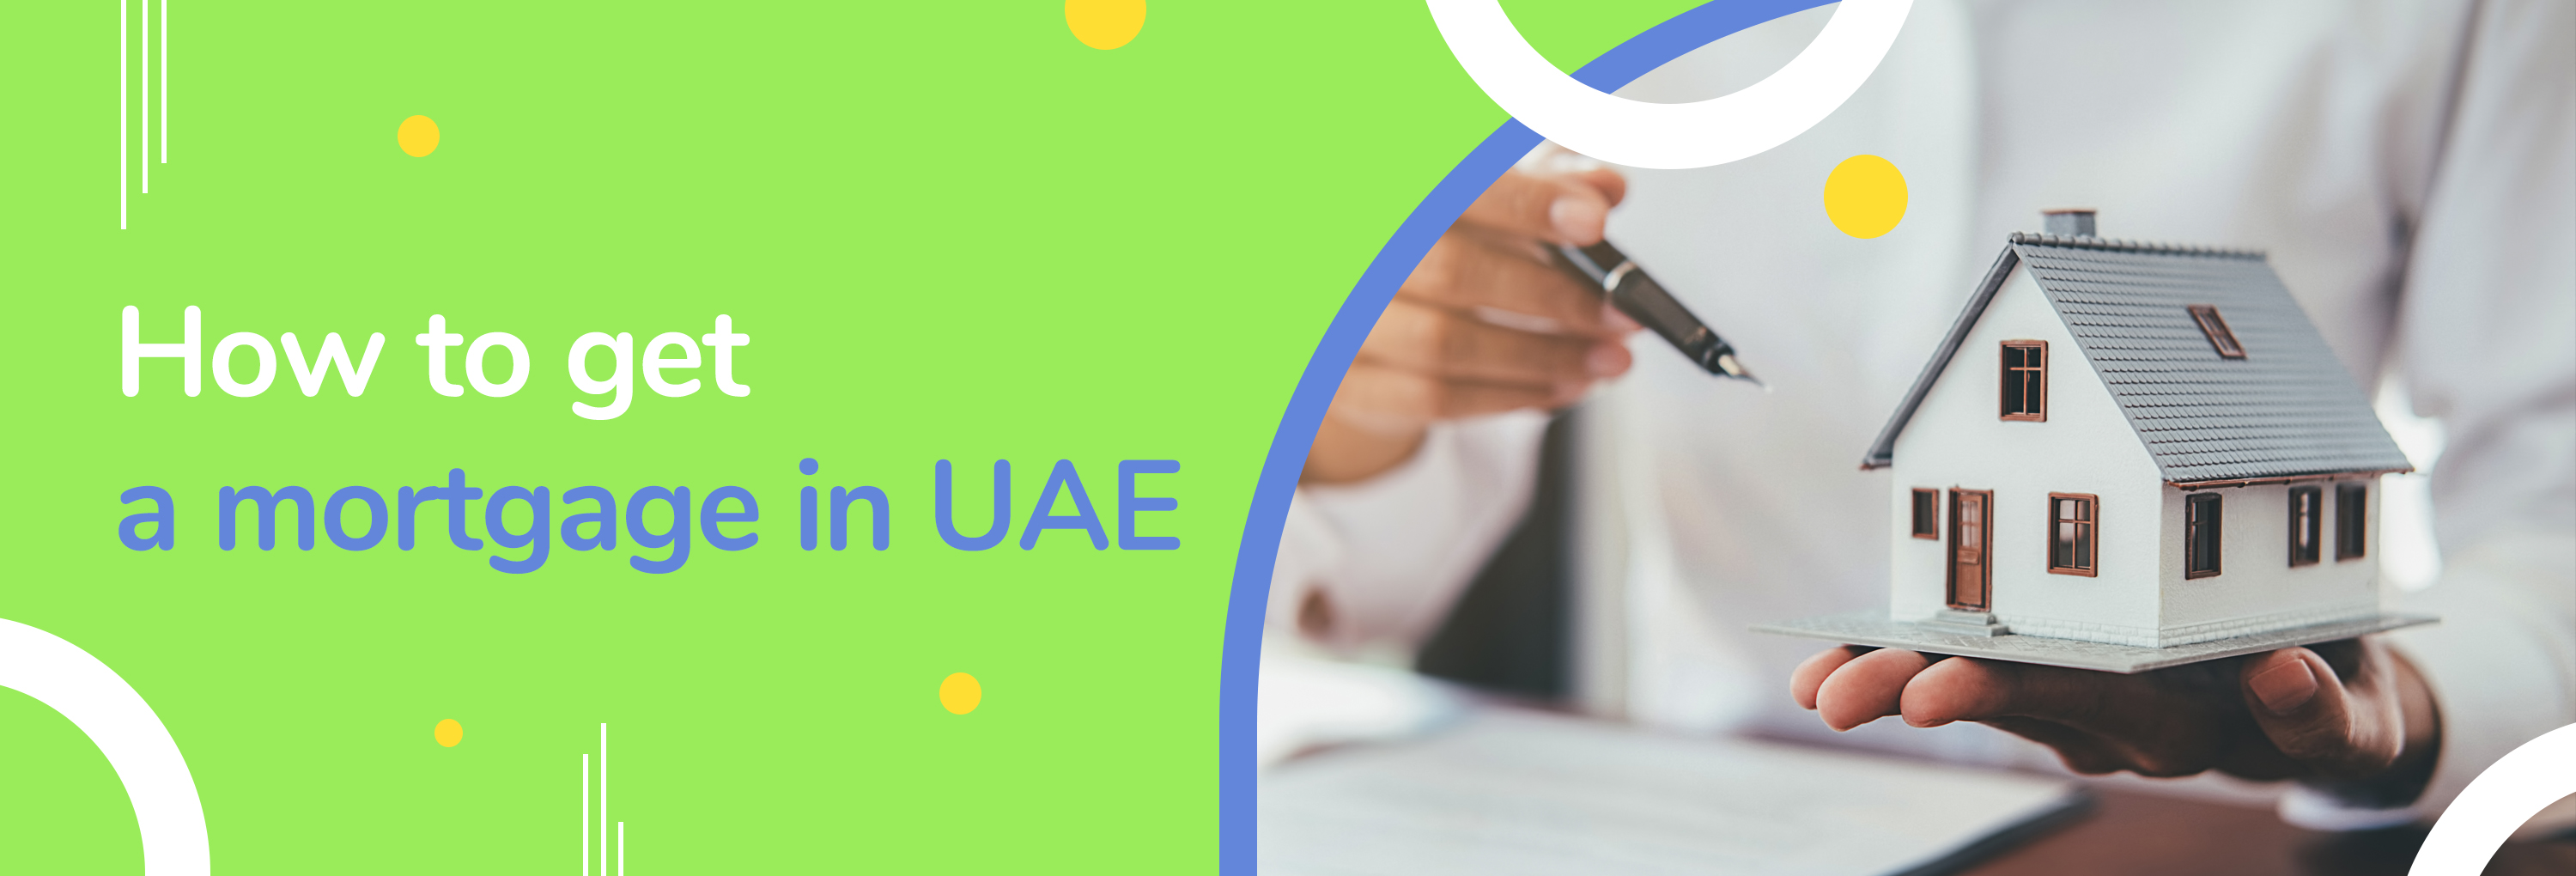 How to get a mortgage in UAE